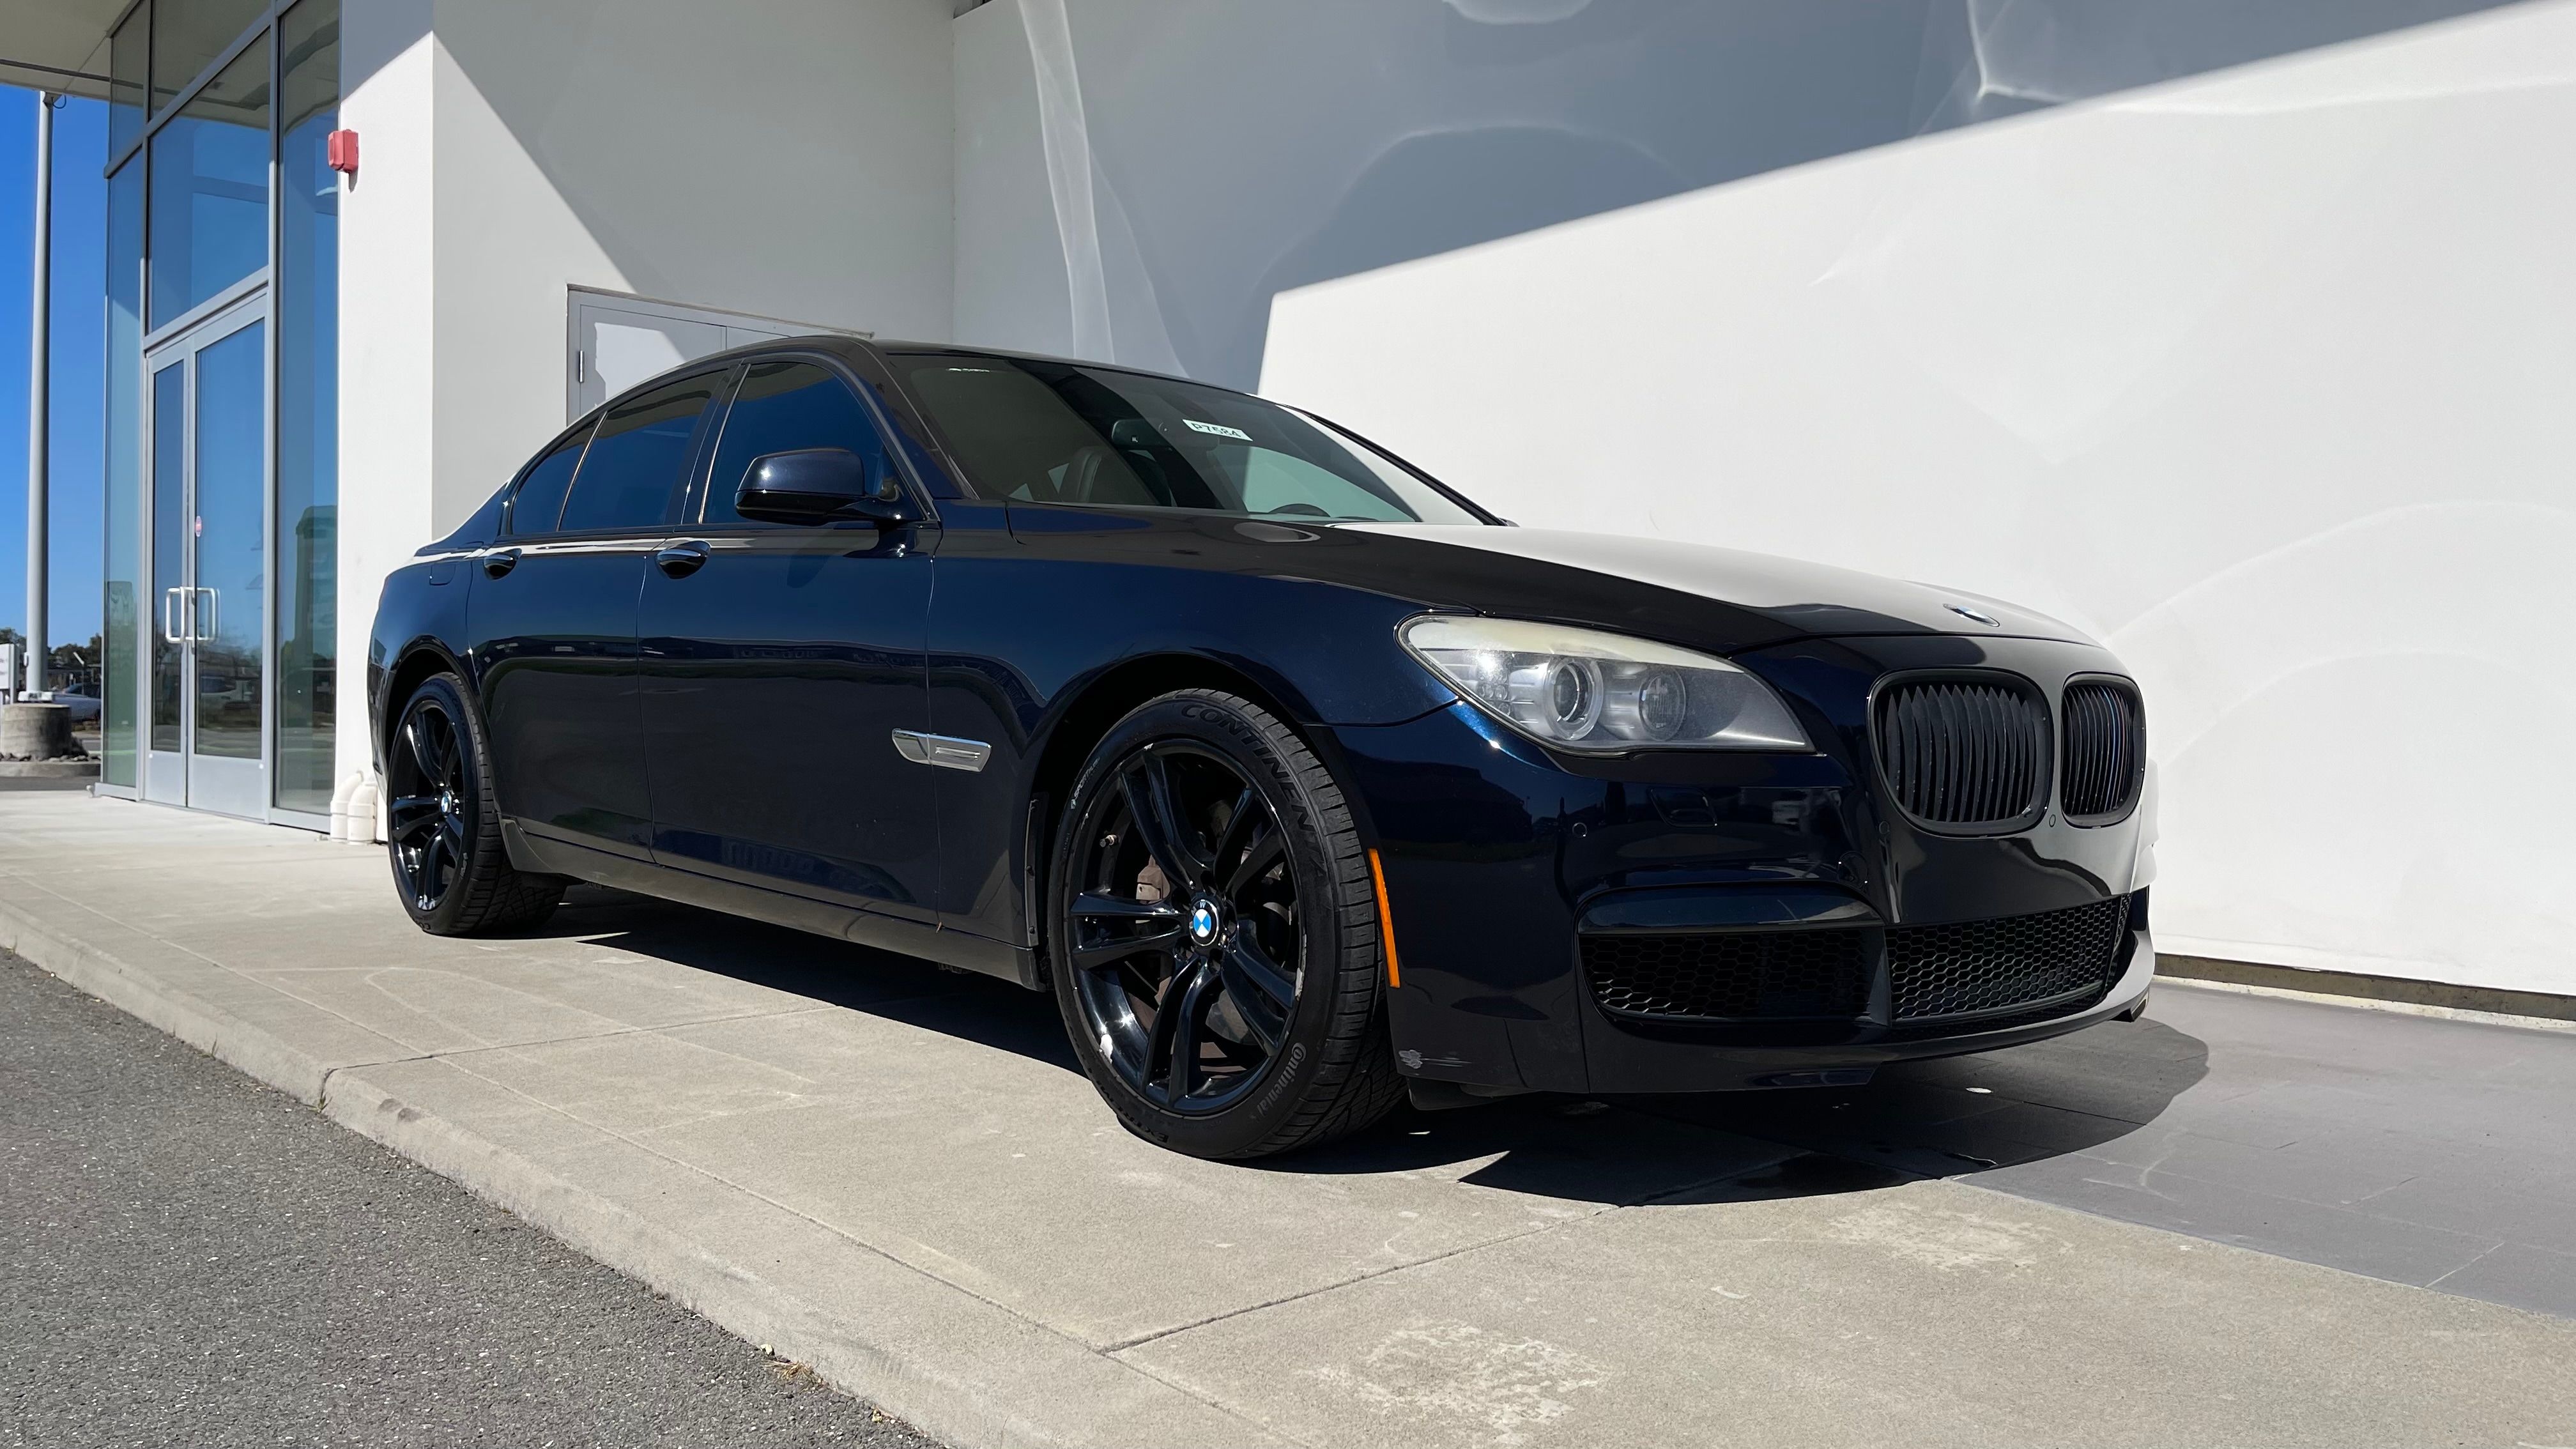 Used 2012 BMW 7 Series 750i with VIN WBAKA8C54CDS99997 for sale in Mckinleyville, CA